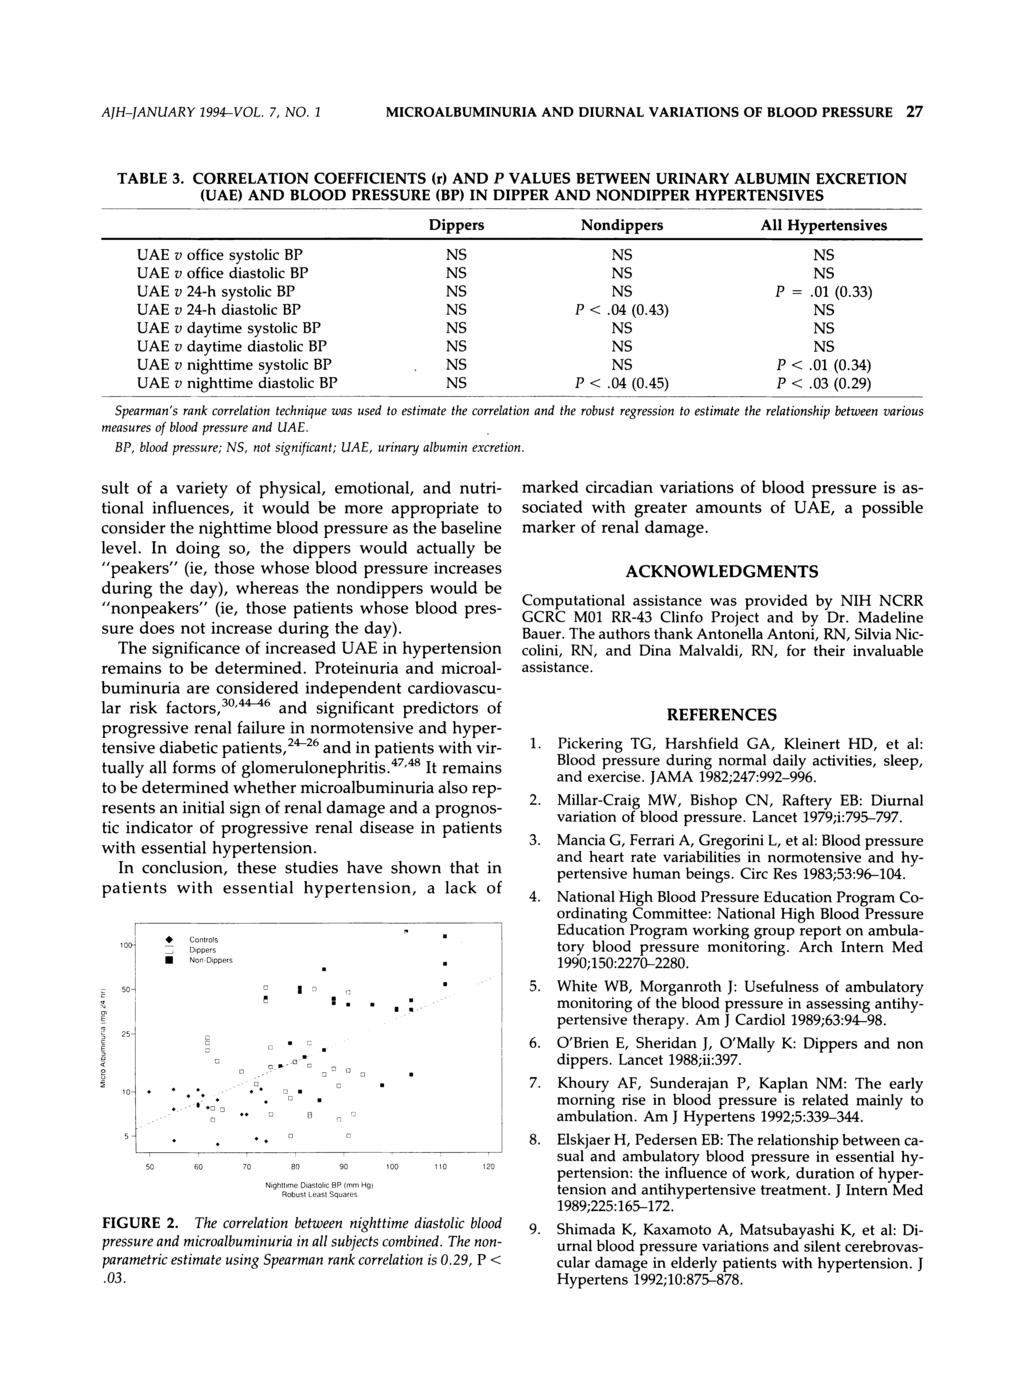 G D AJH-JANUARY 1994-VOL. 7, NO. 1 MICROALBUMINURIA AND DIURNAL VARIATIONS OF BLOOD PRESSURE 27 TABLE 3.